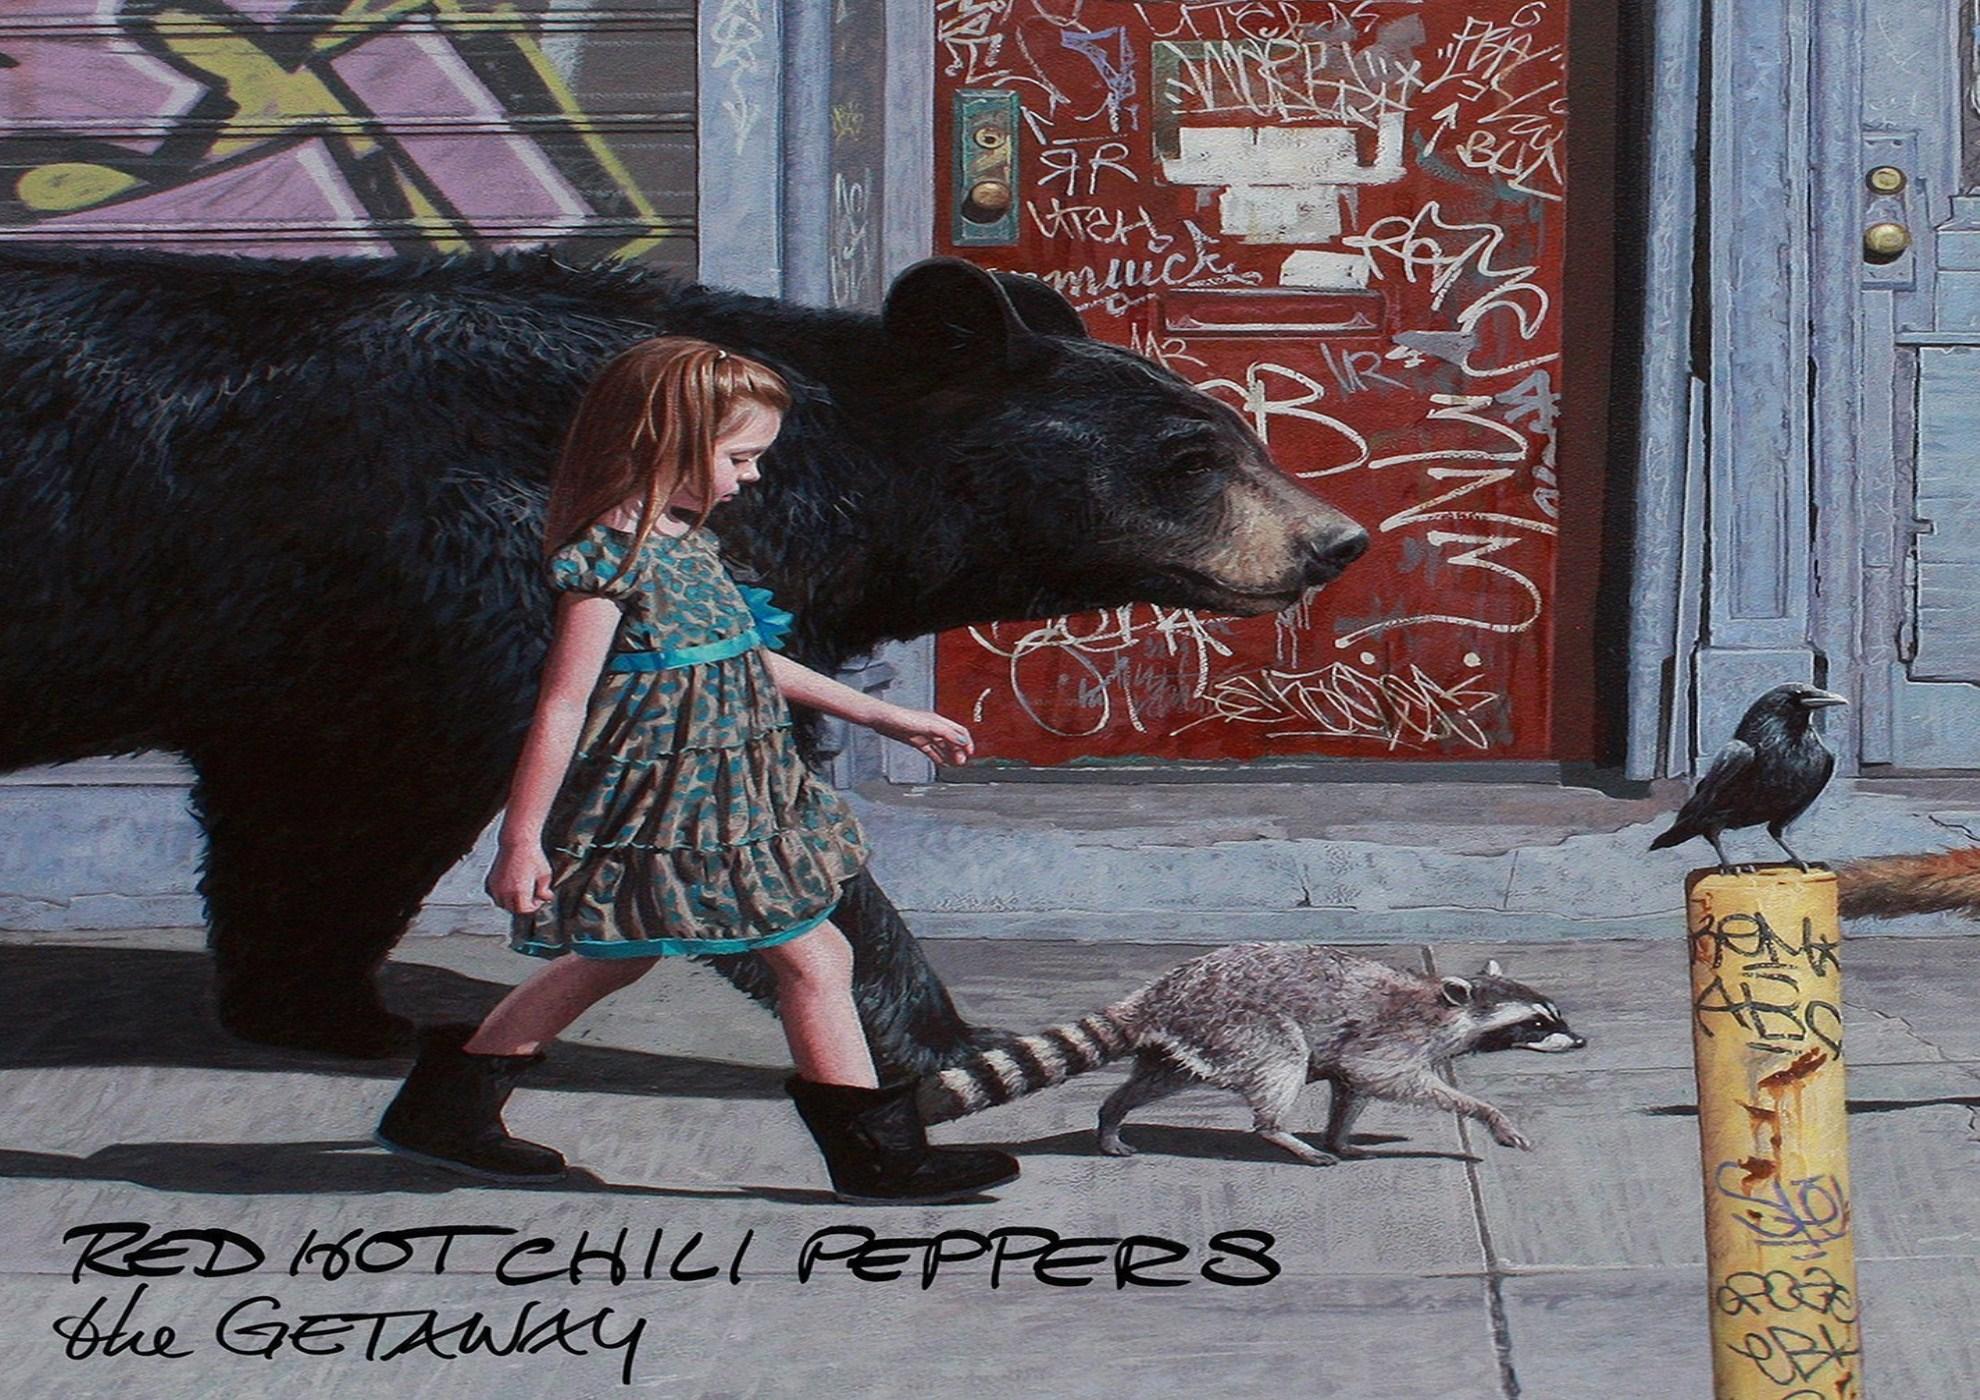 Red hot peppers dark necessities. Red hot Chili Peppers the Getaway 2016. The Getaway альбом Red hot Chili Peppers. Red hot Chili Peppers - the Getaway - 2016 - LP. The Getaway Red hot Chili Peppers обложка.